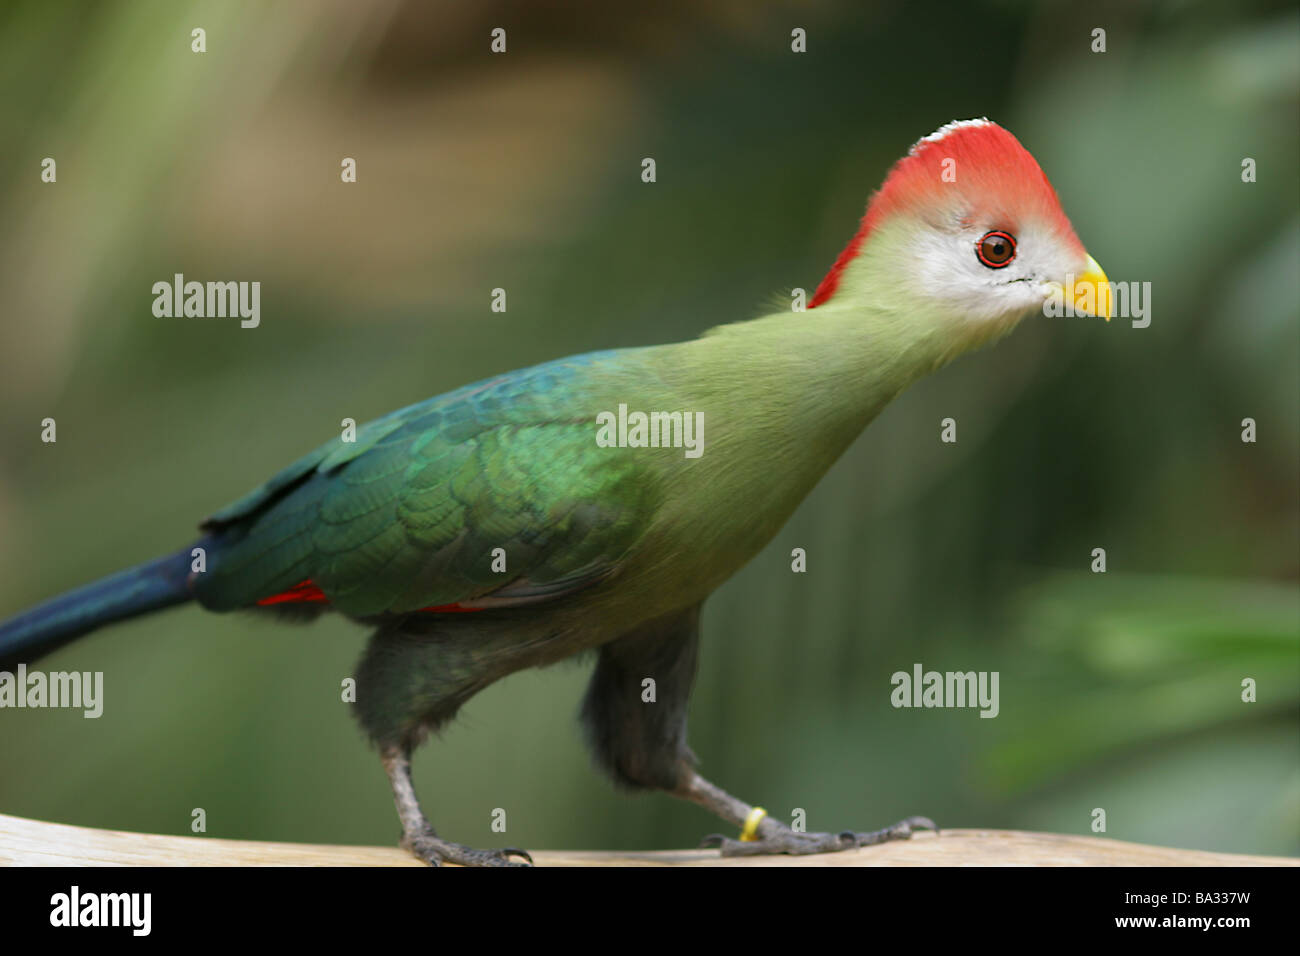 Red crested's Turaco bird Foto Stock